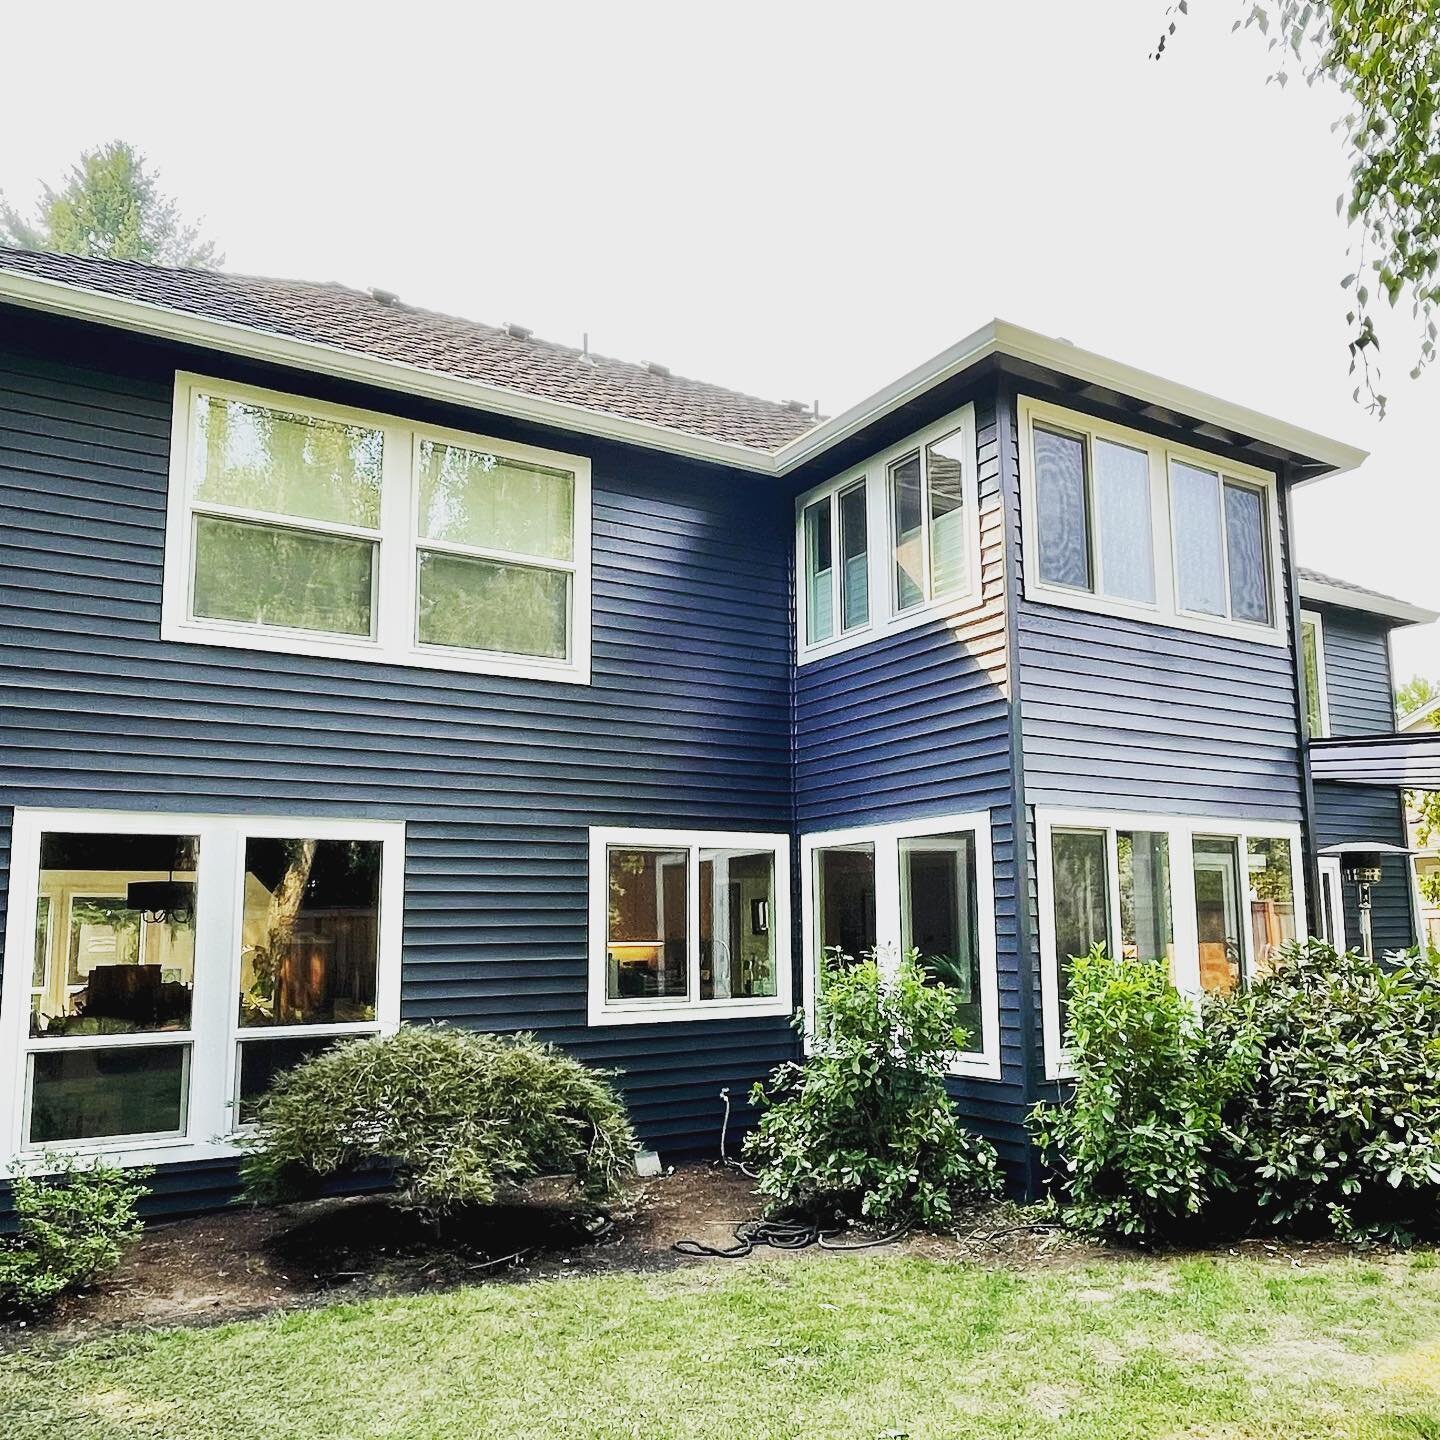 #beforeandafter ⬅️ Wrapping up new windows, trim and paint on this LO home.  We were fortunate to be able to work on both some interior and exterior transformations for these sweet clients.  Front of house pics coming soon!
.
.
.
.
.
.
.
.
#exteriorp